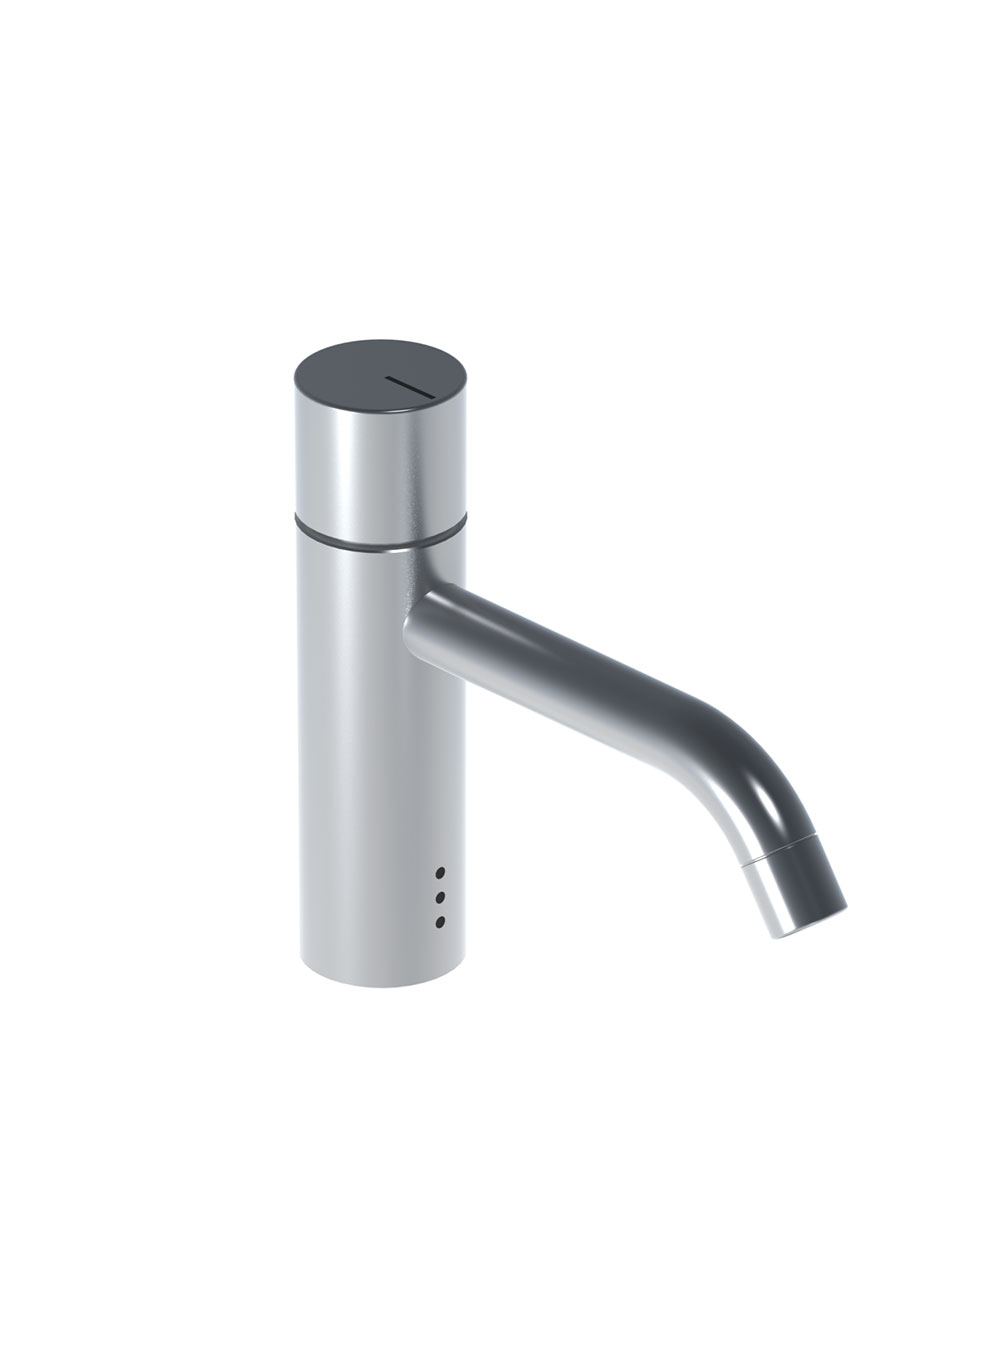 HV1E/150: Basin mixer with on-off sensor for ‘hands free’ operation with spout projection 150 mm.      The ...